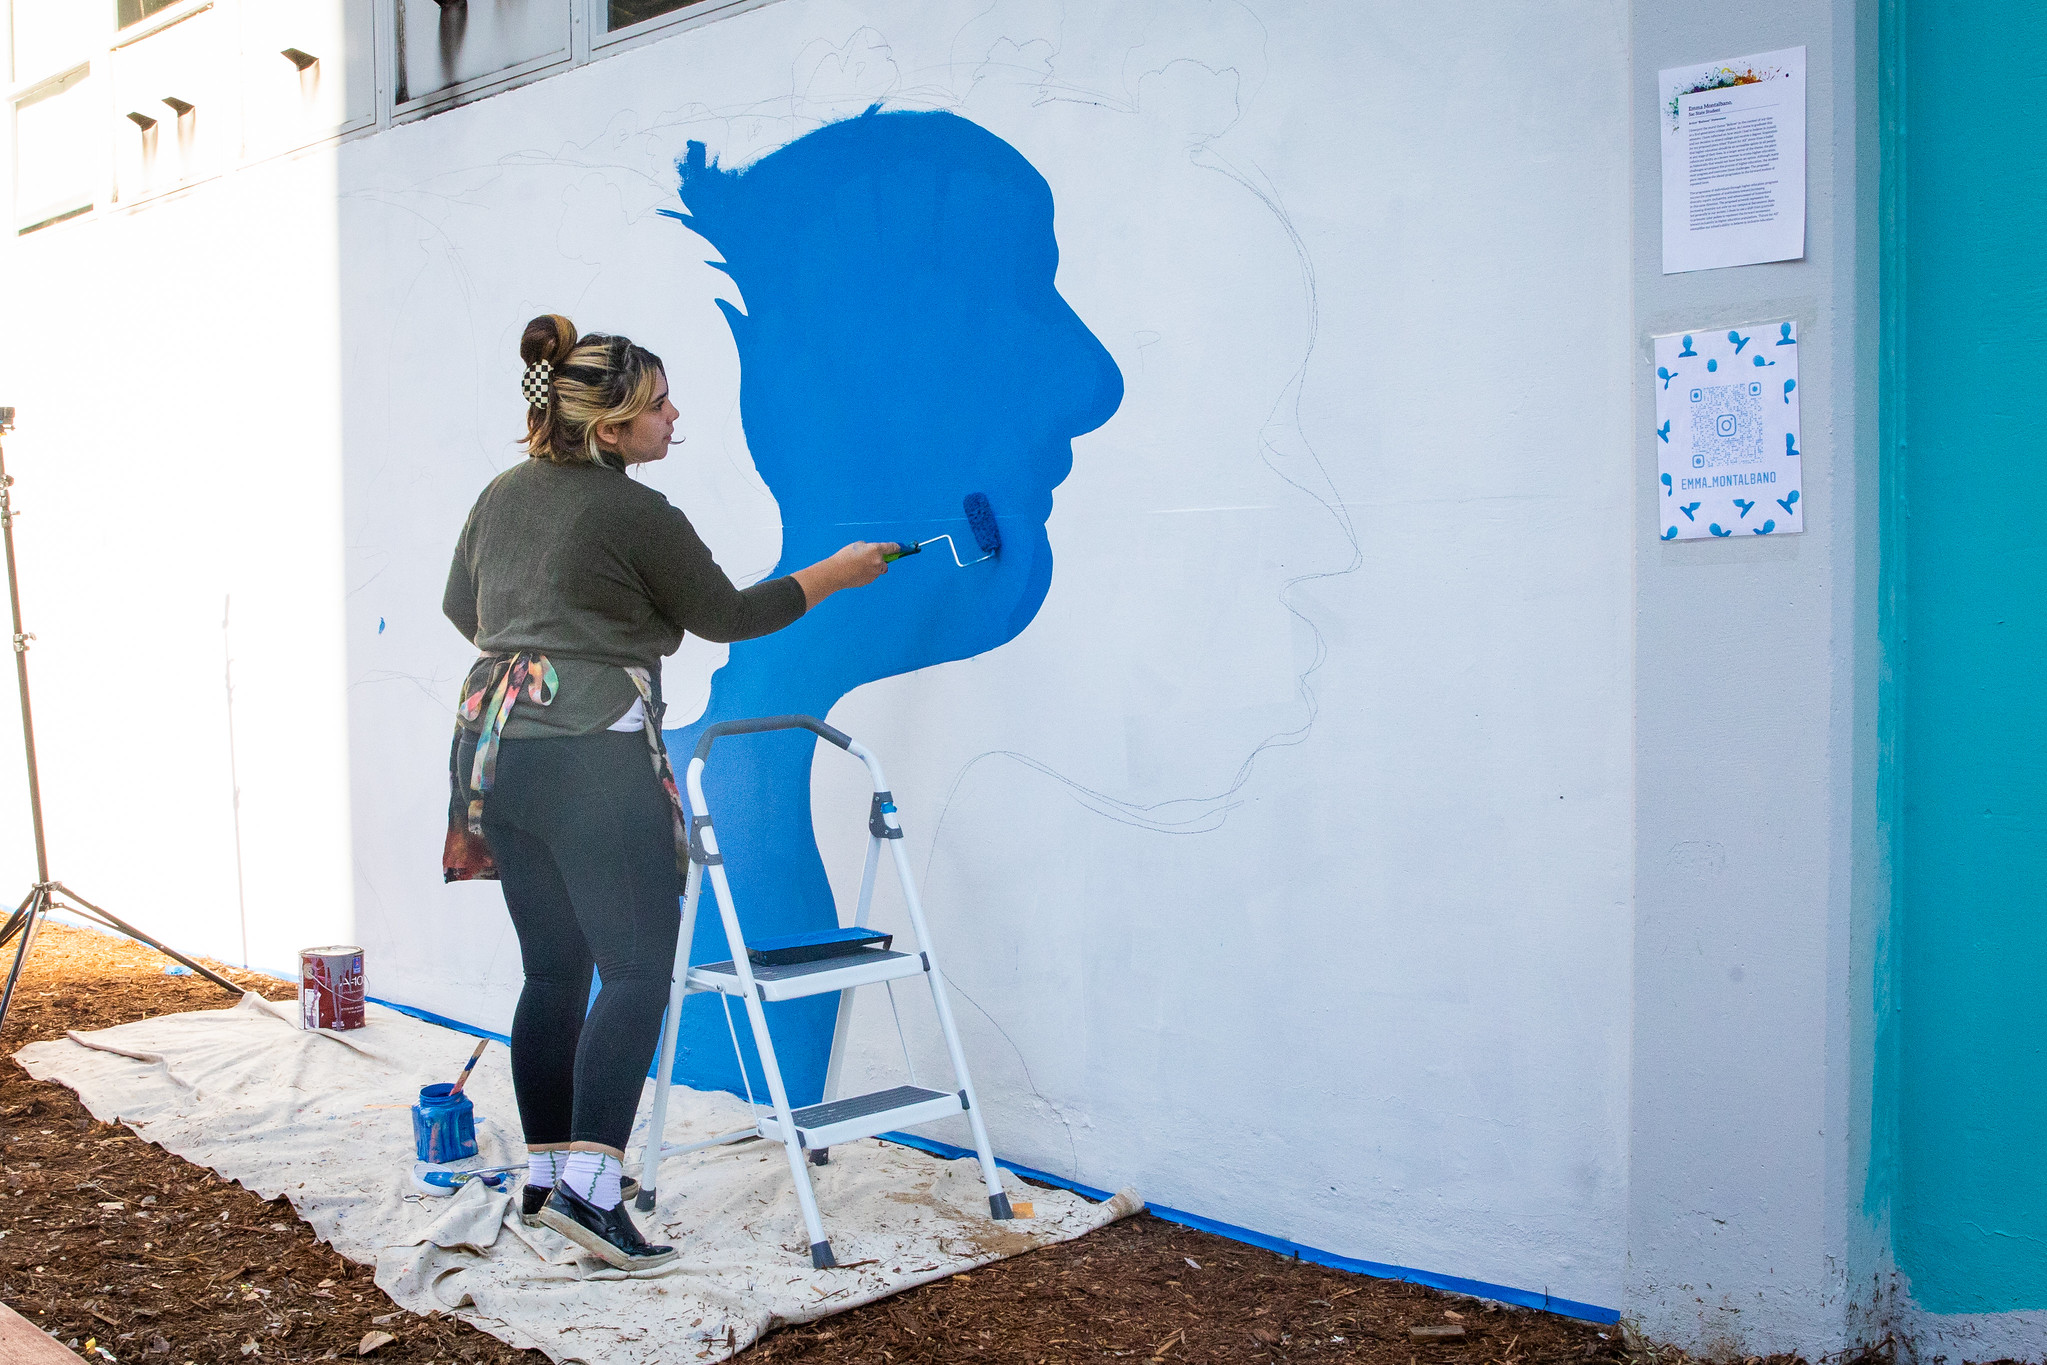 Emma Montalbano, standing outdoors, painting a mural depicting a person in side profile, colored blue on a white background